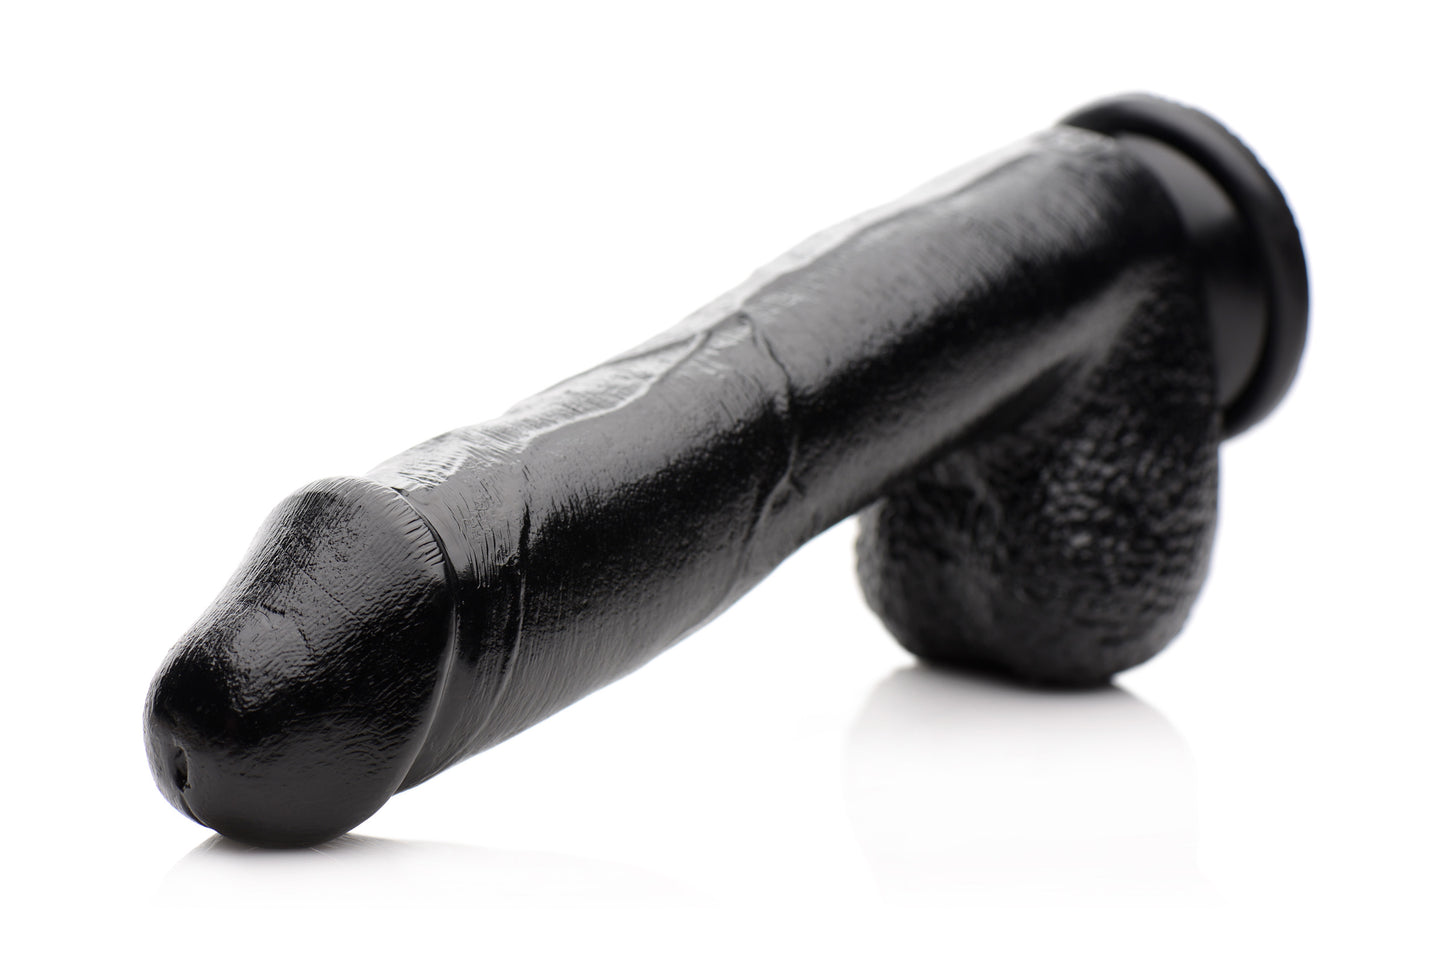 Mighty Midnight 10 Inch Dildo with Suction Cup - UABDSM